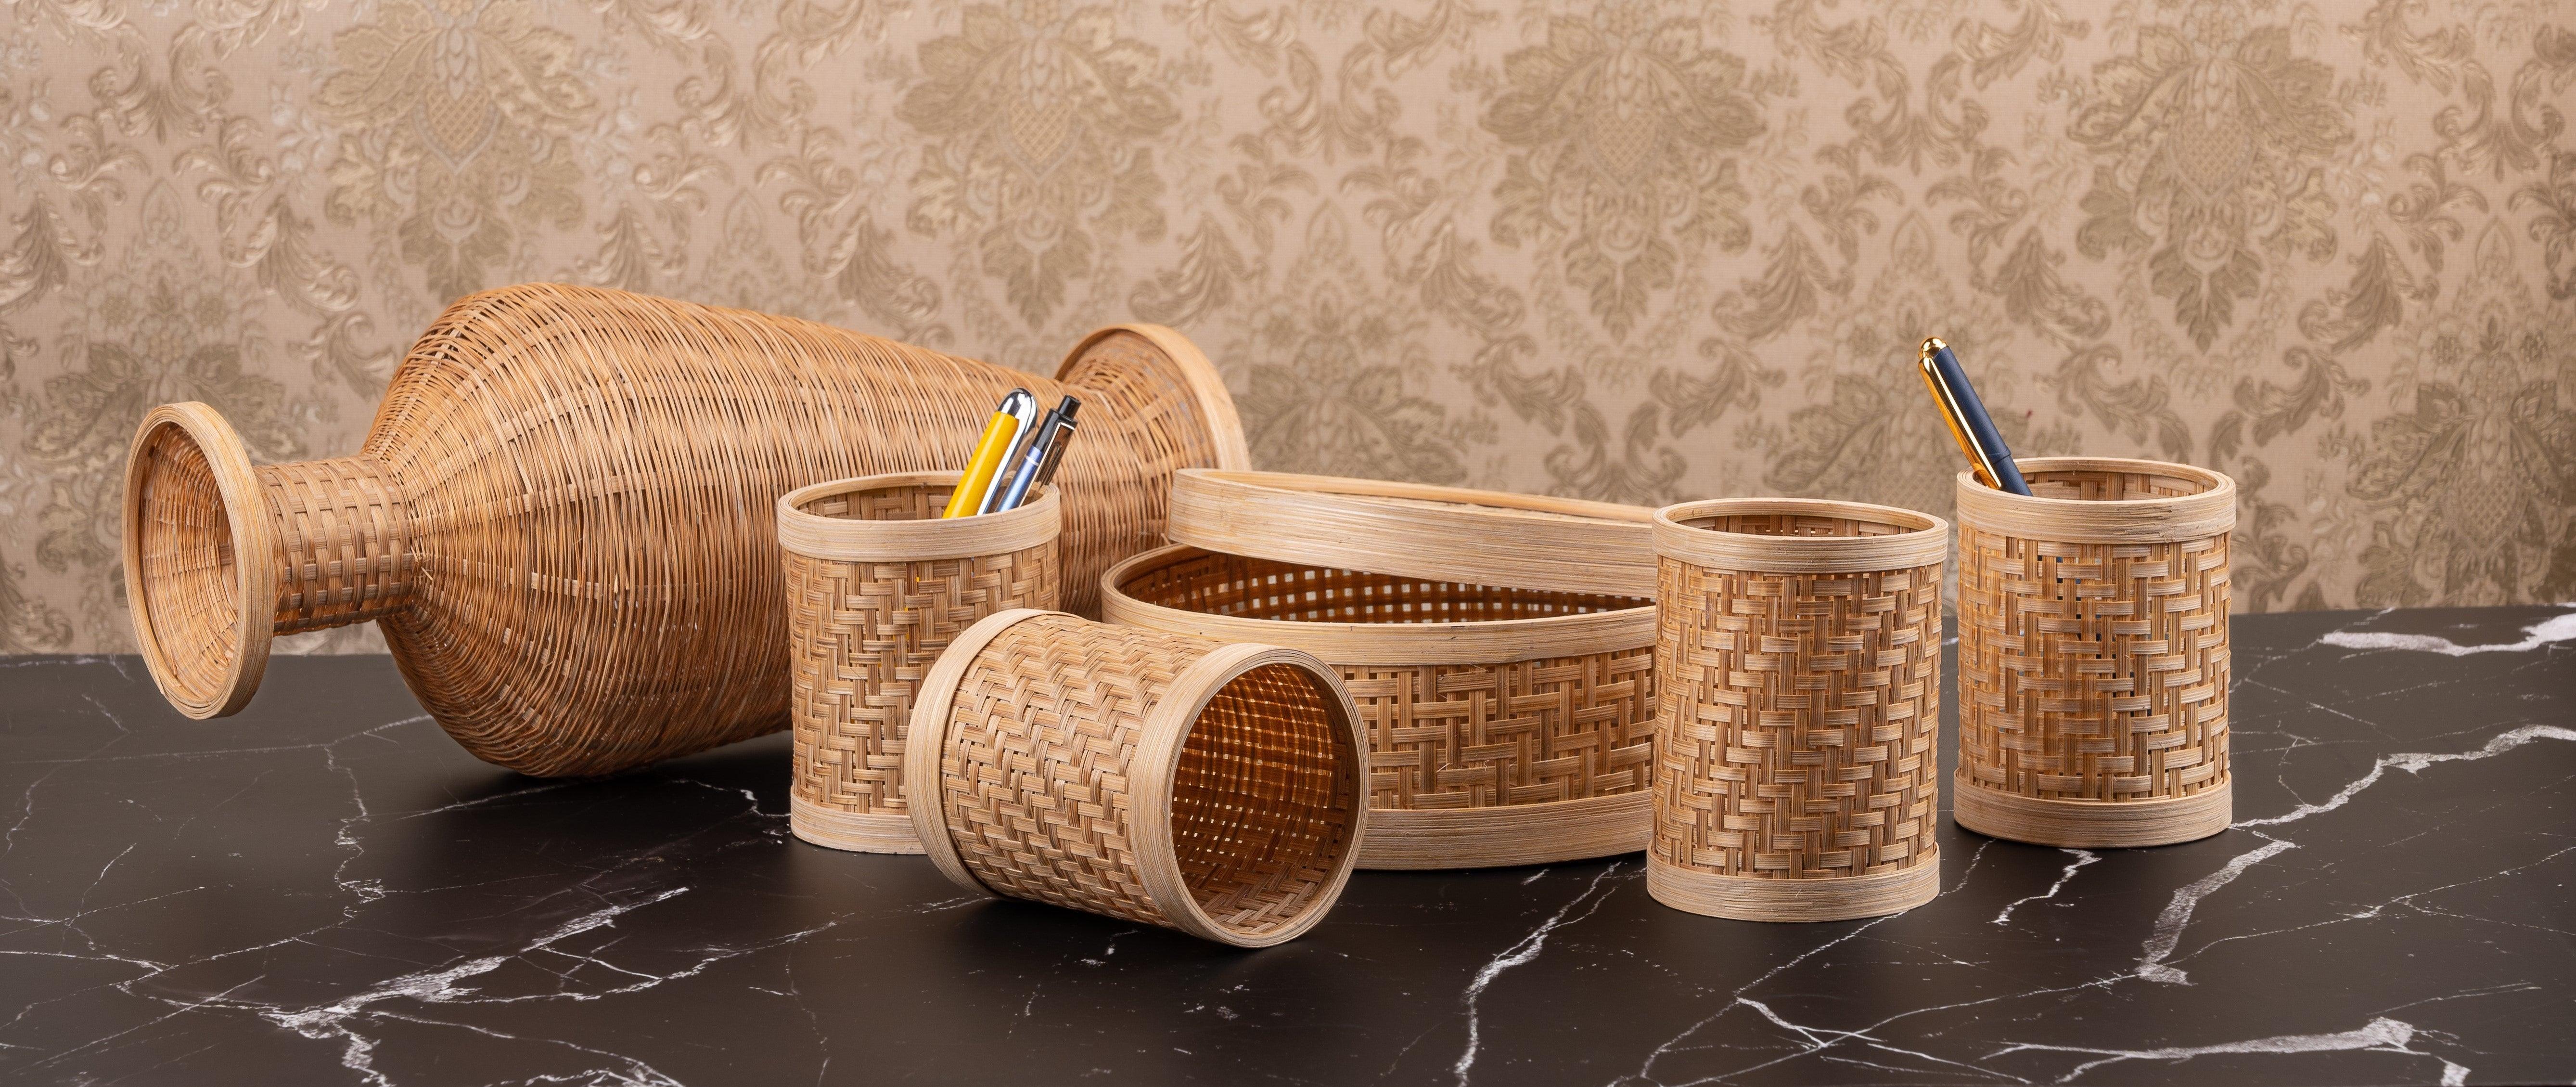 Bamboo weave craft - The Heritage Artifacts